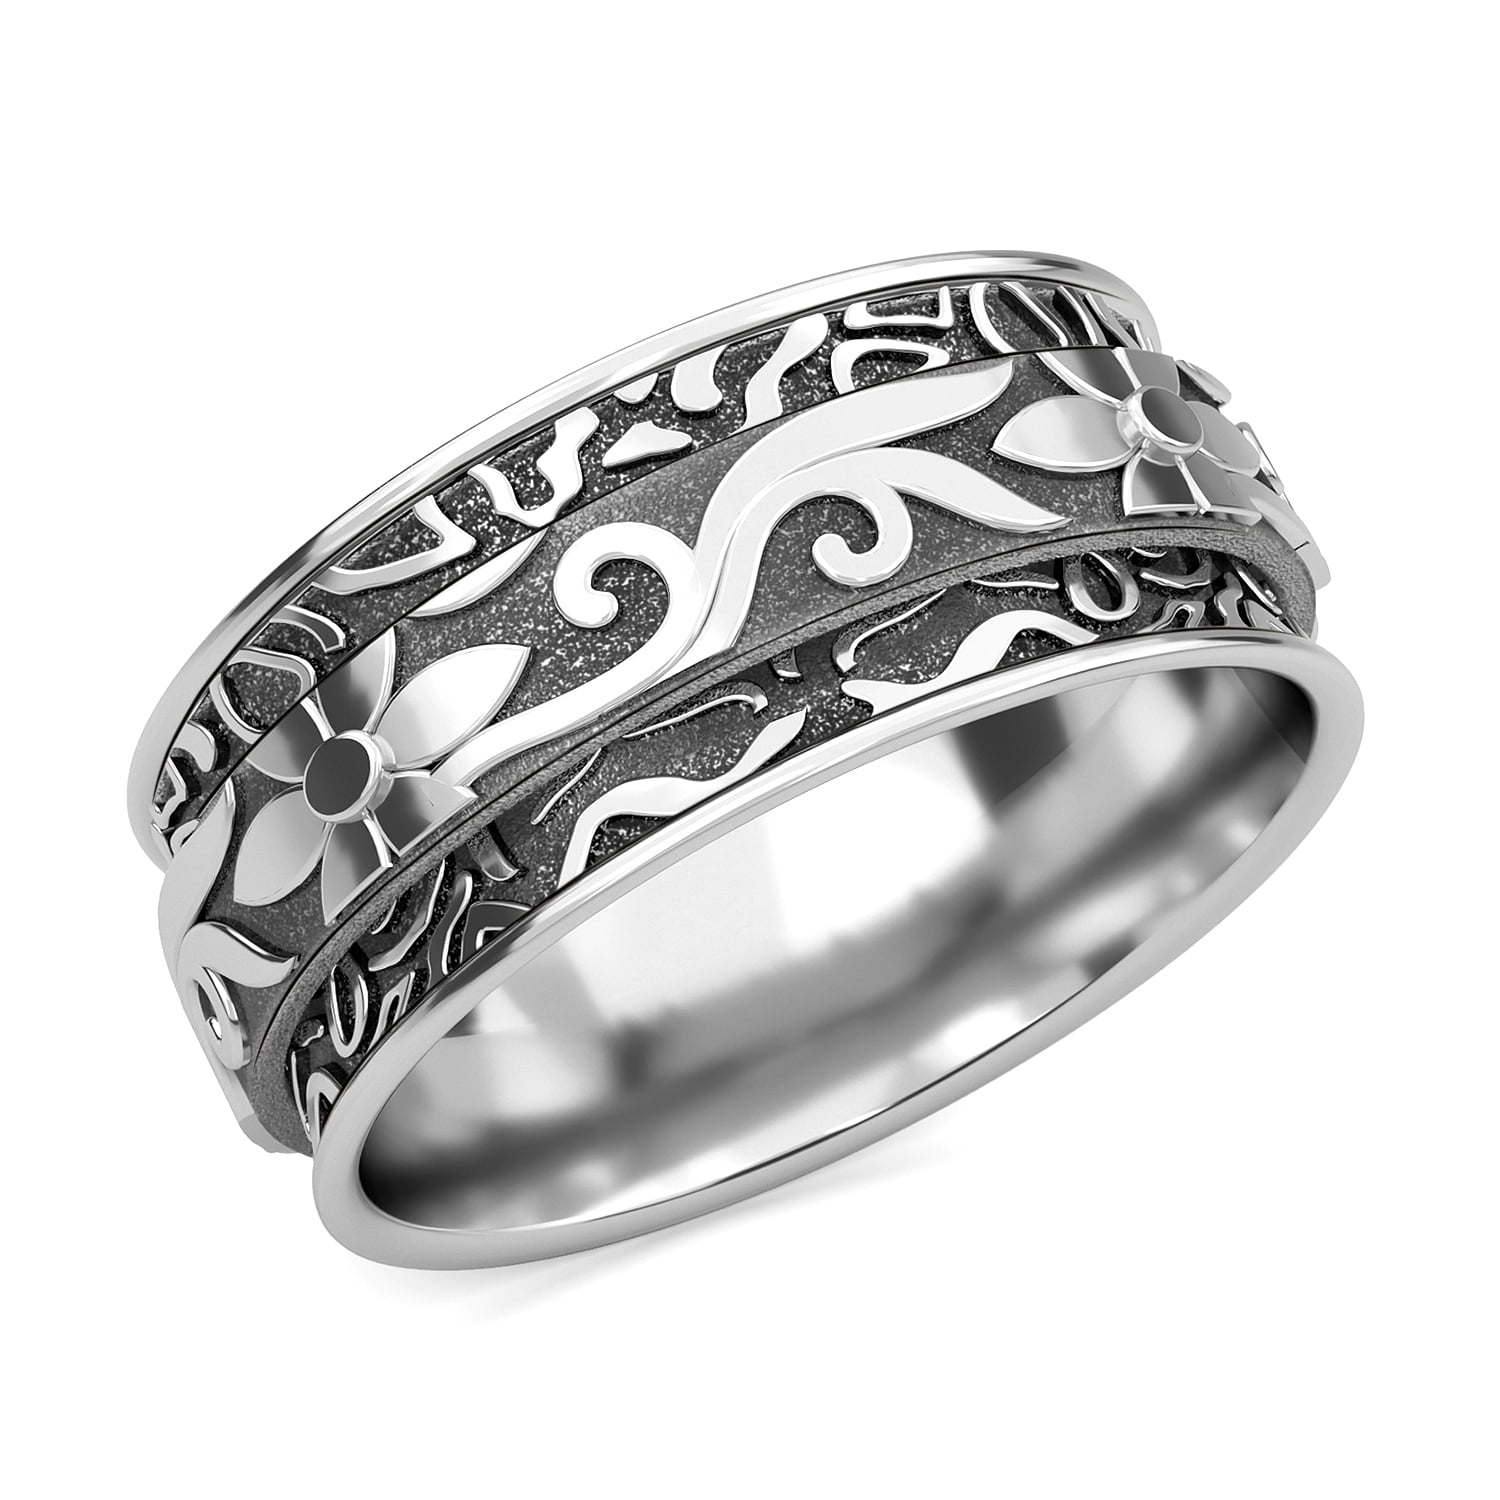 Mens Womens 925 Sterling Silver Vines Scrolls Spinning Worry Band Thumb Ring 